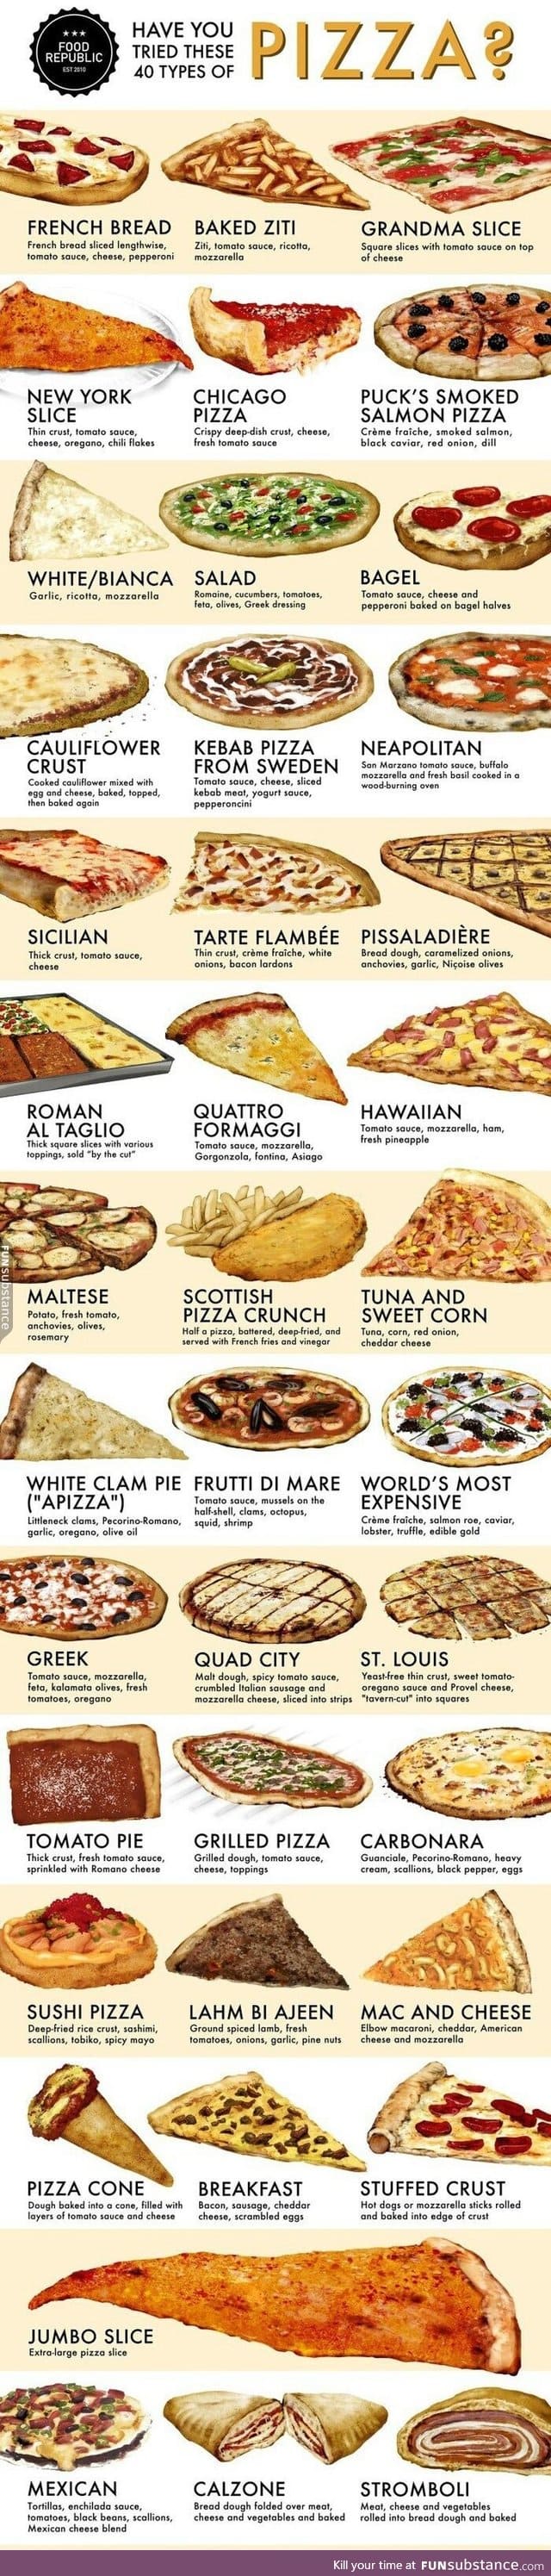 All the different pizzas